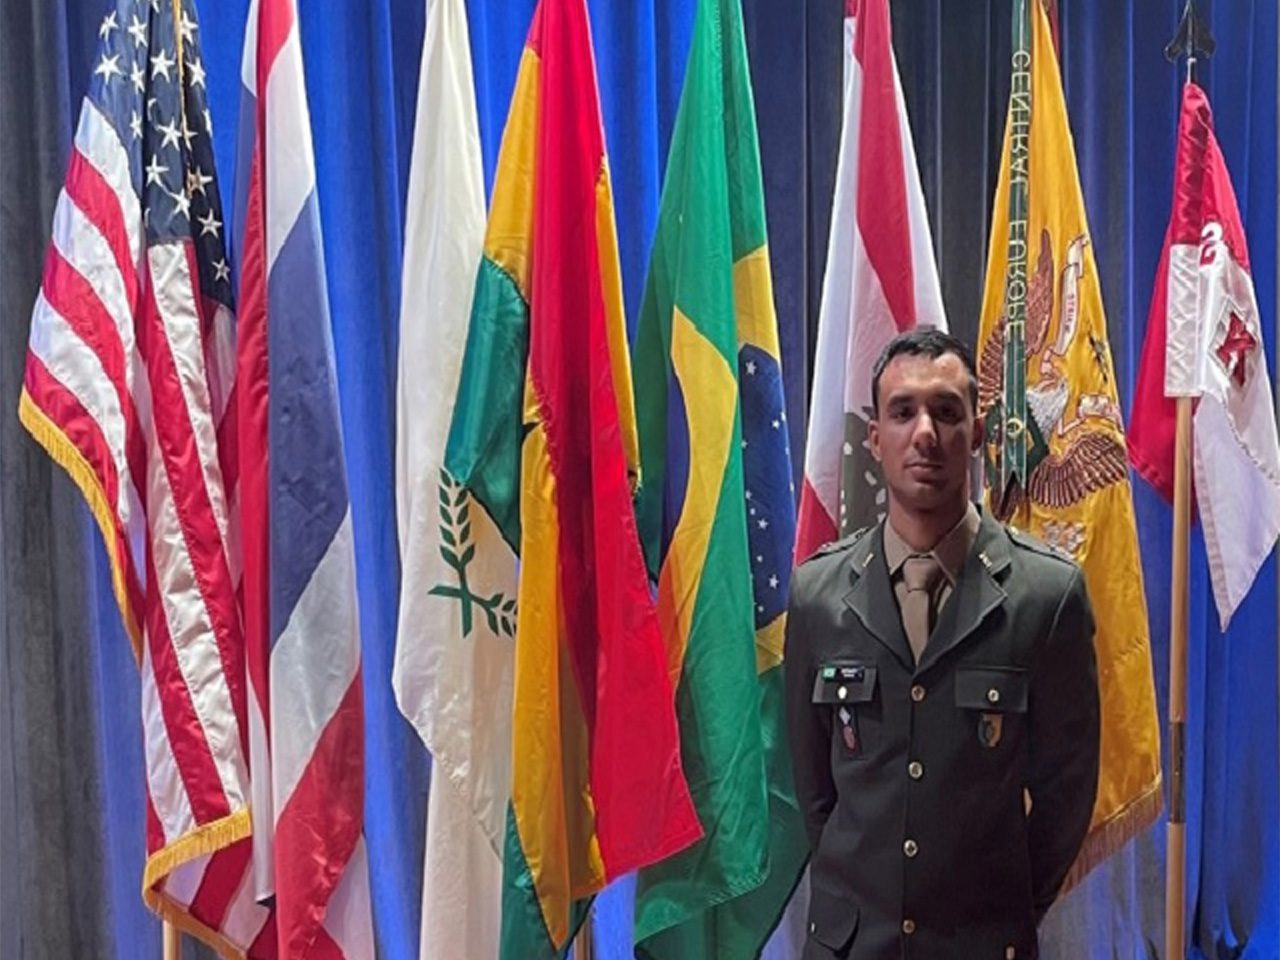 Brazilian officer stands out at the U.S. Army's Armored School